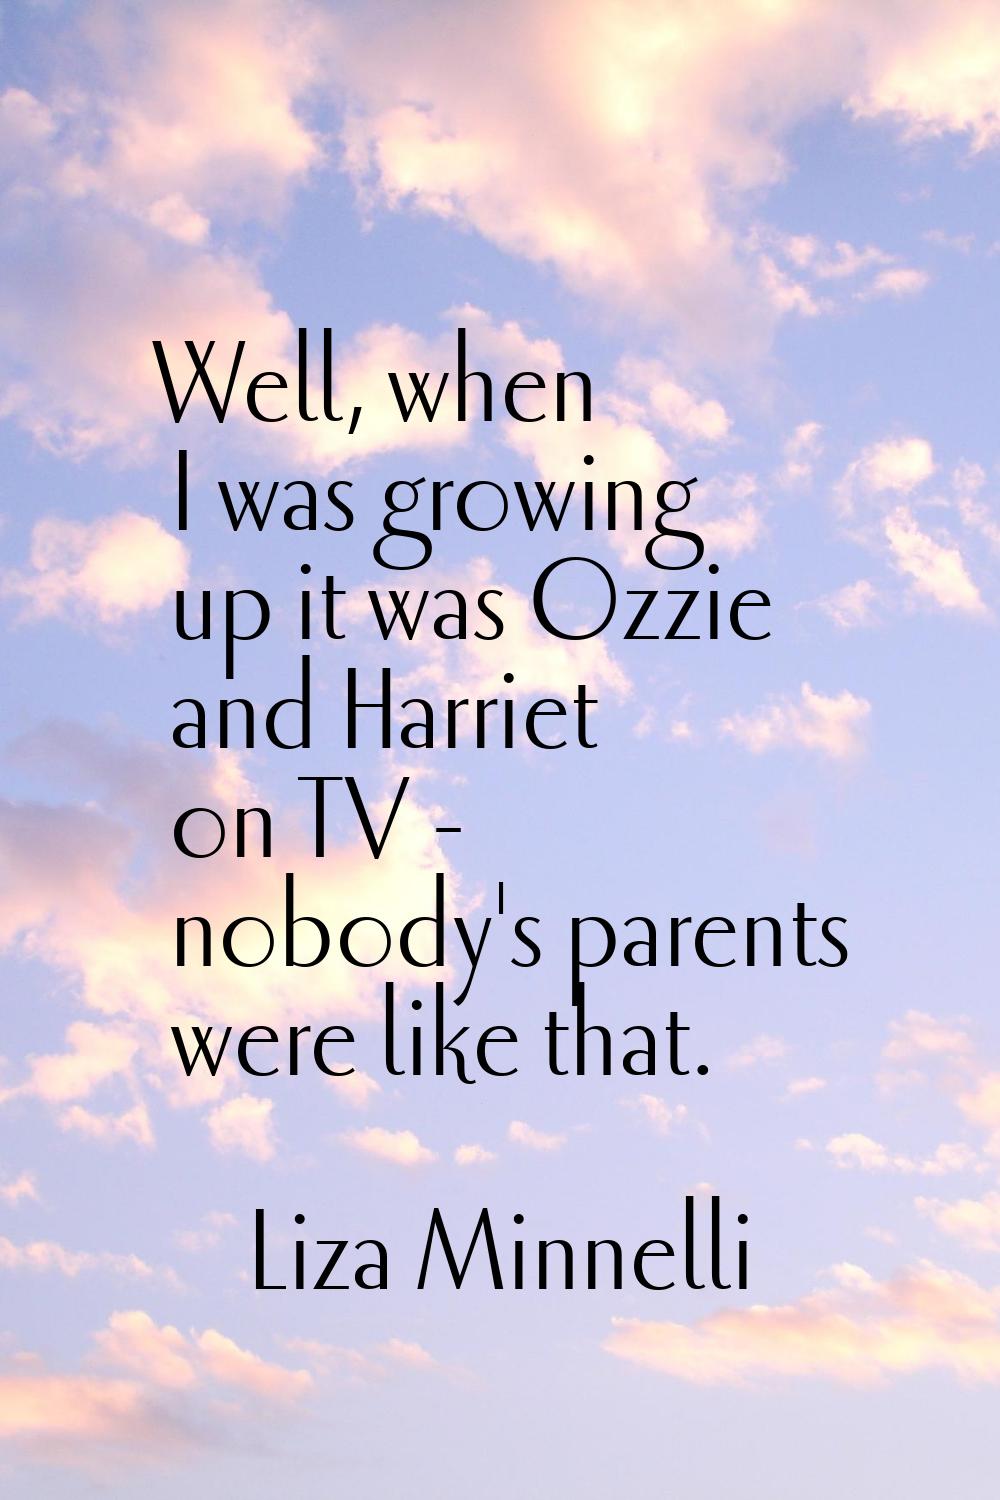 Well, when I was growing up it was Ozzie and Harriet on TV - nobody's parents were like that.